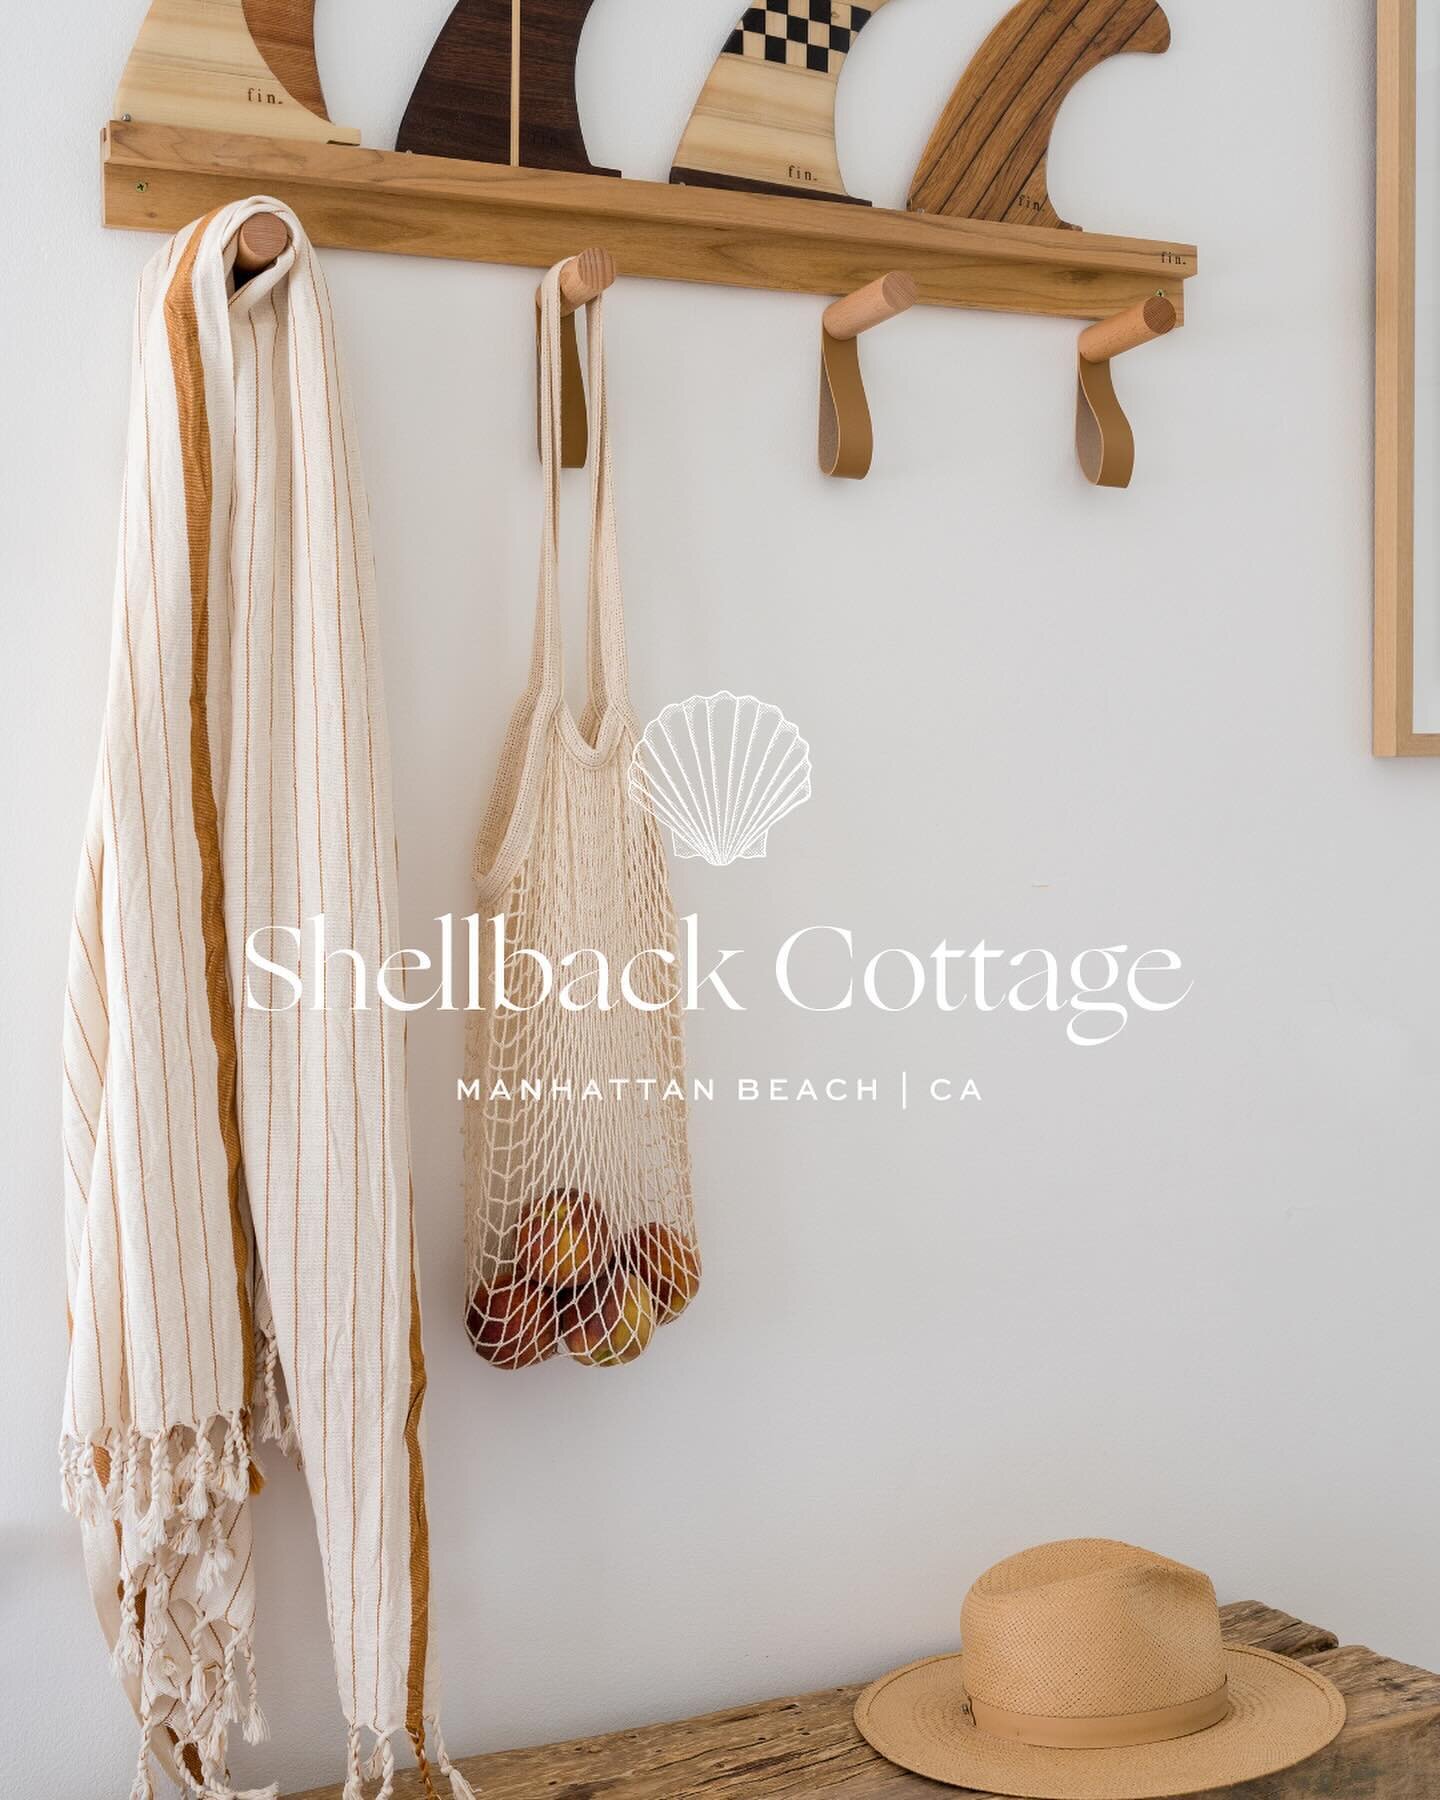 New Brand Highlight! ⭐️

@shellbackcottage isn&rsquo;t your typical Airbnb rental&mdash;it&rsquo;s a coastal sanctuary where California living meets design. Nestled just steps from the beaches of El Porto, this cottage offers more than accommodation;